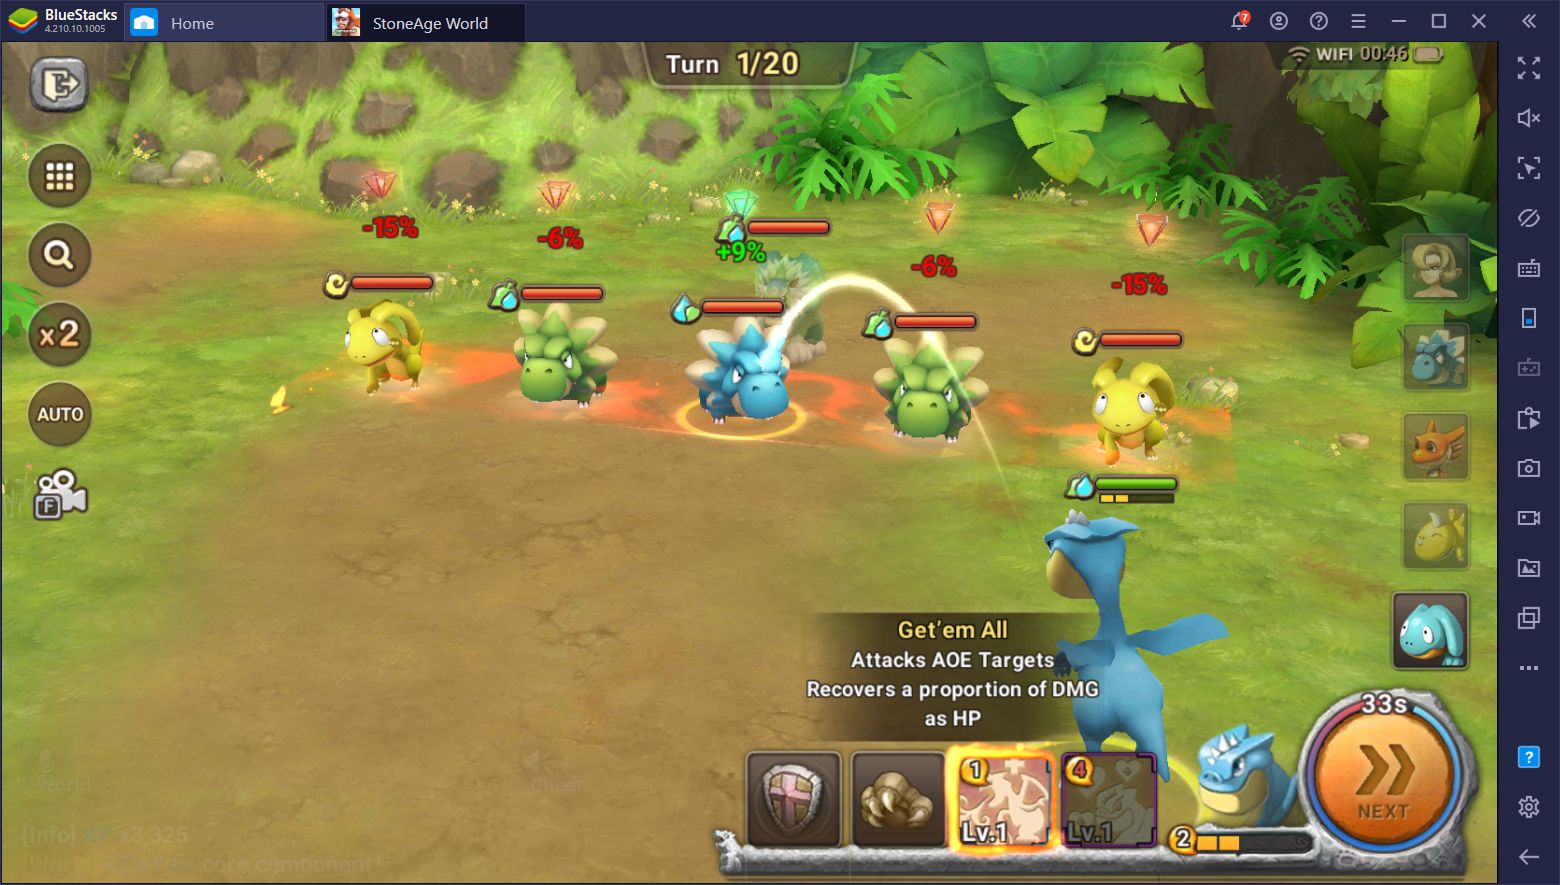 Netmarble's Latest StoneAge World just Launched: Start Playing on PC with BlueStacks